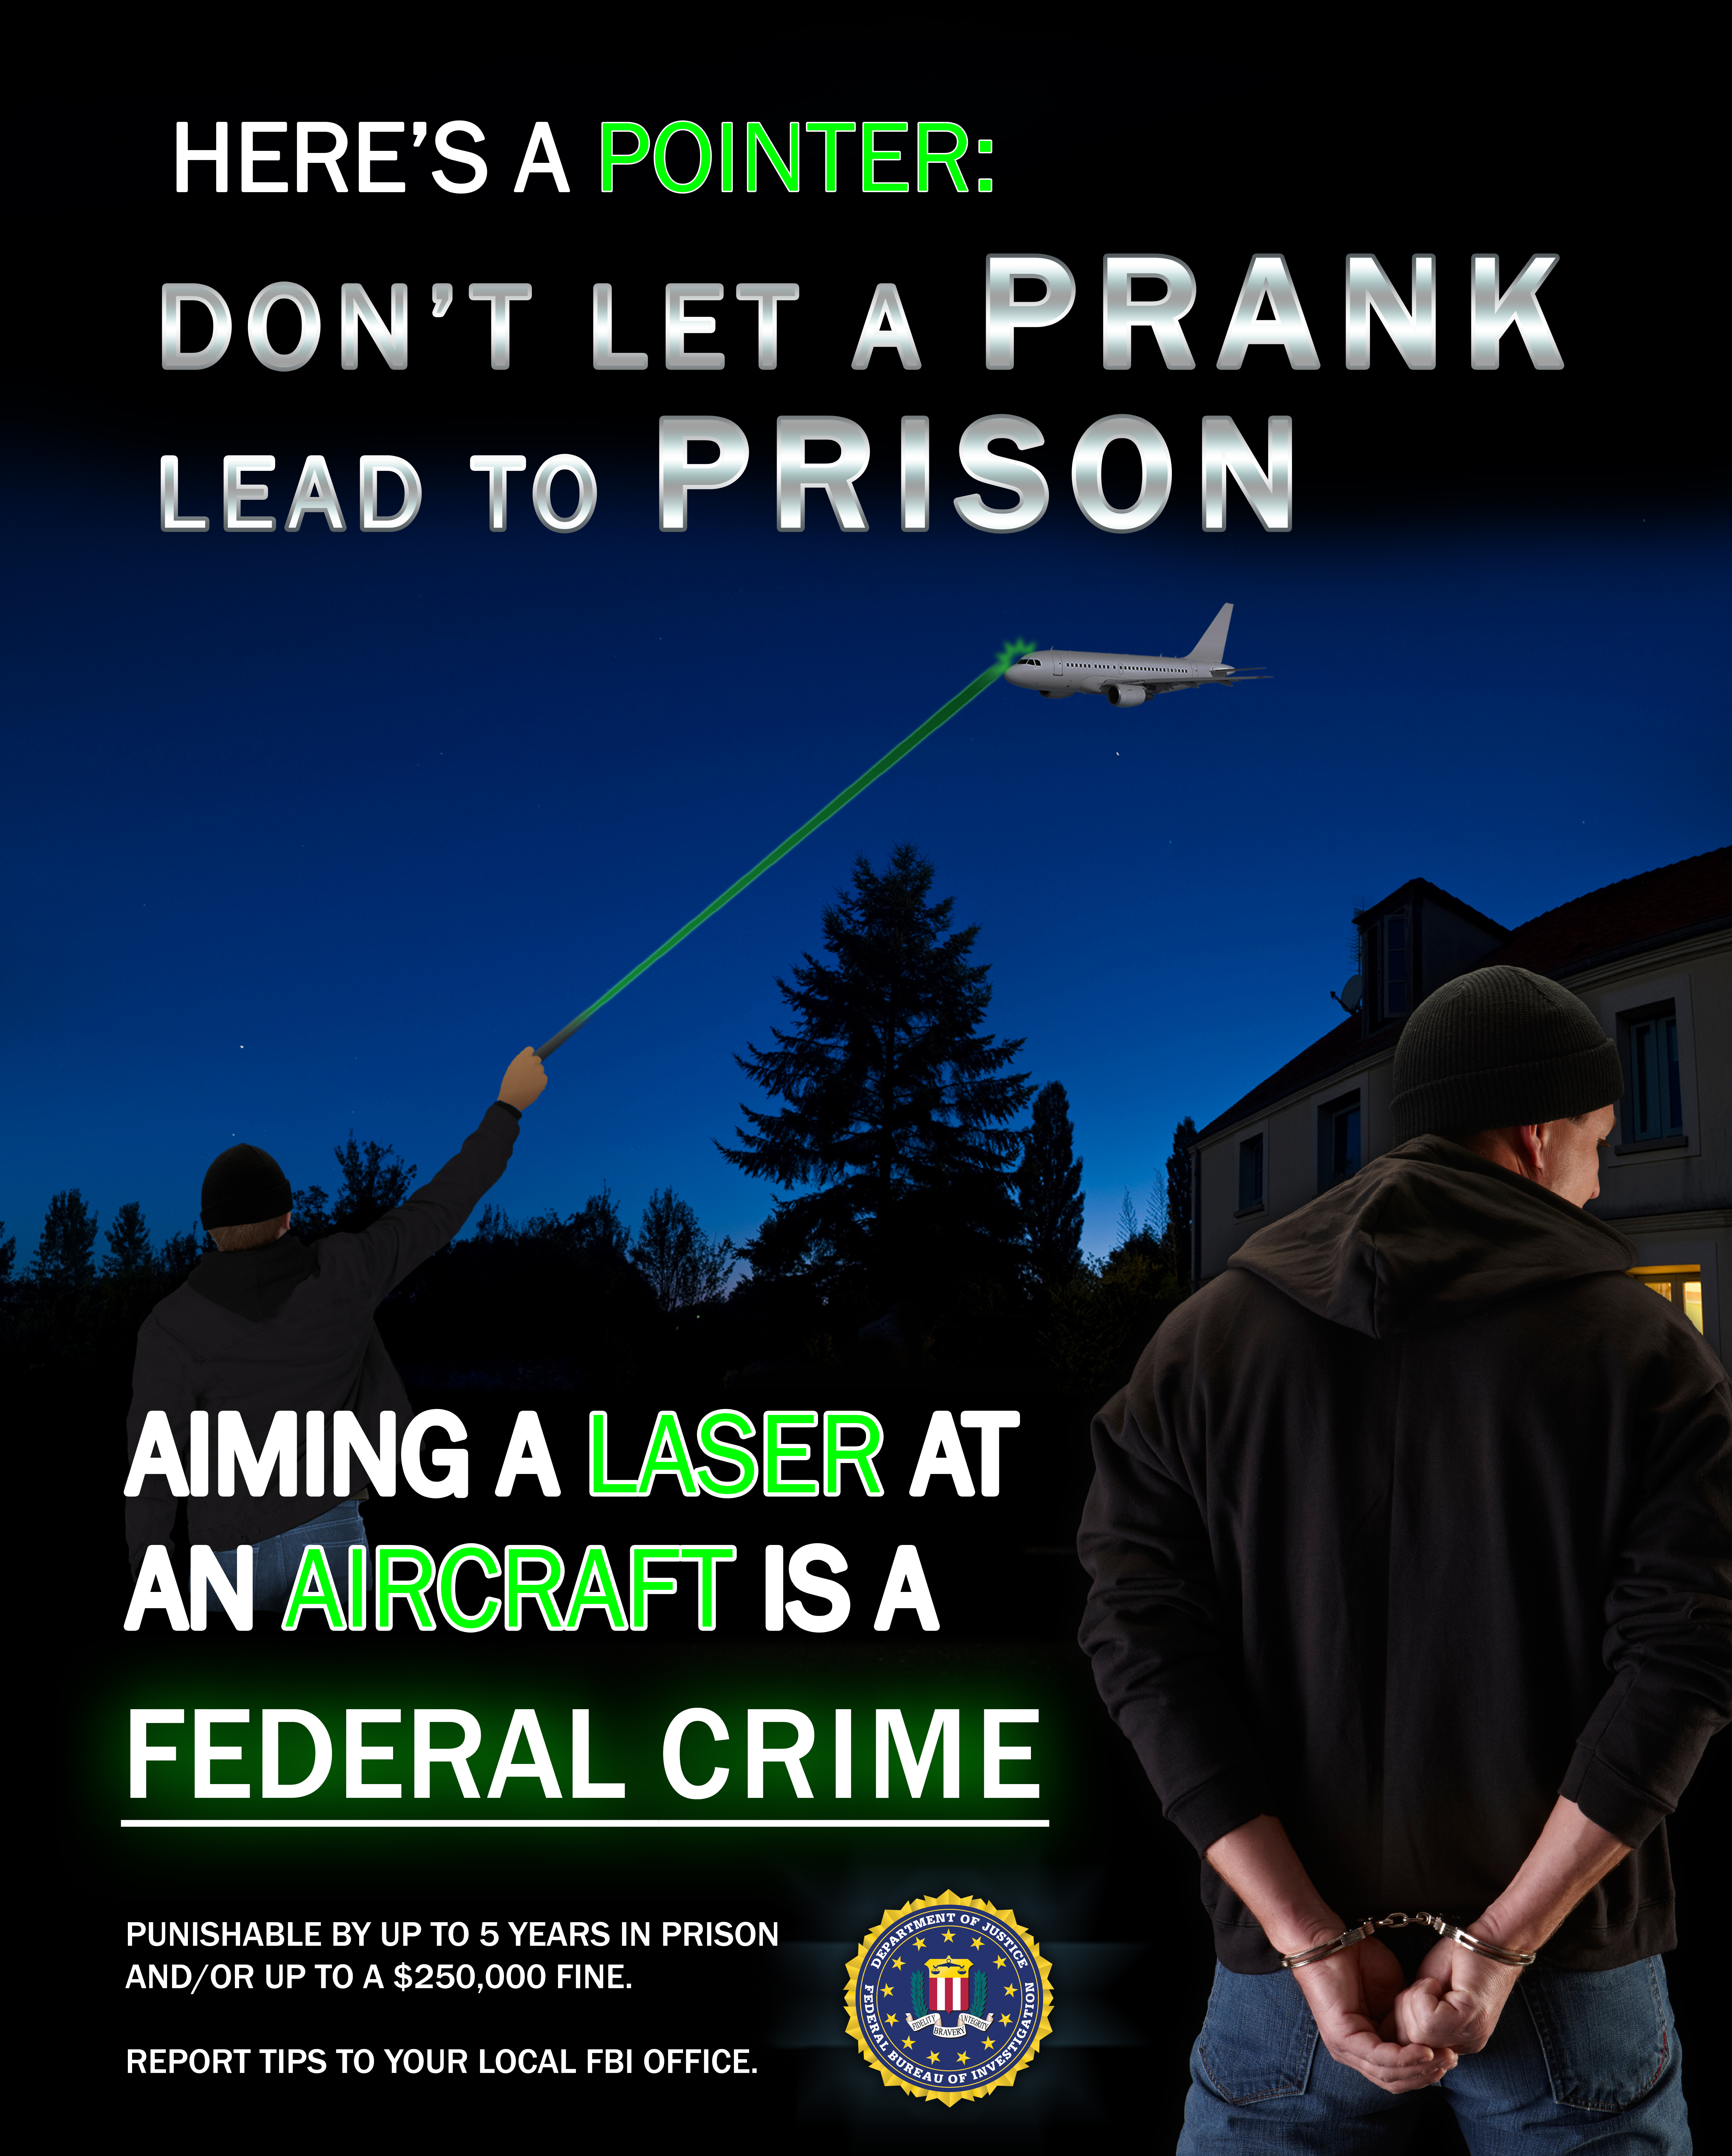 Protecting Aircraft from Lasers Poster (Rural)